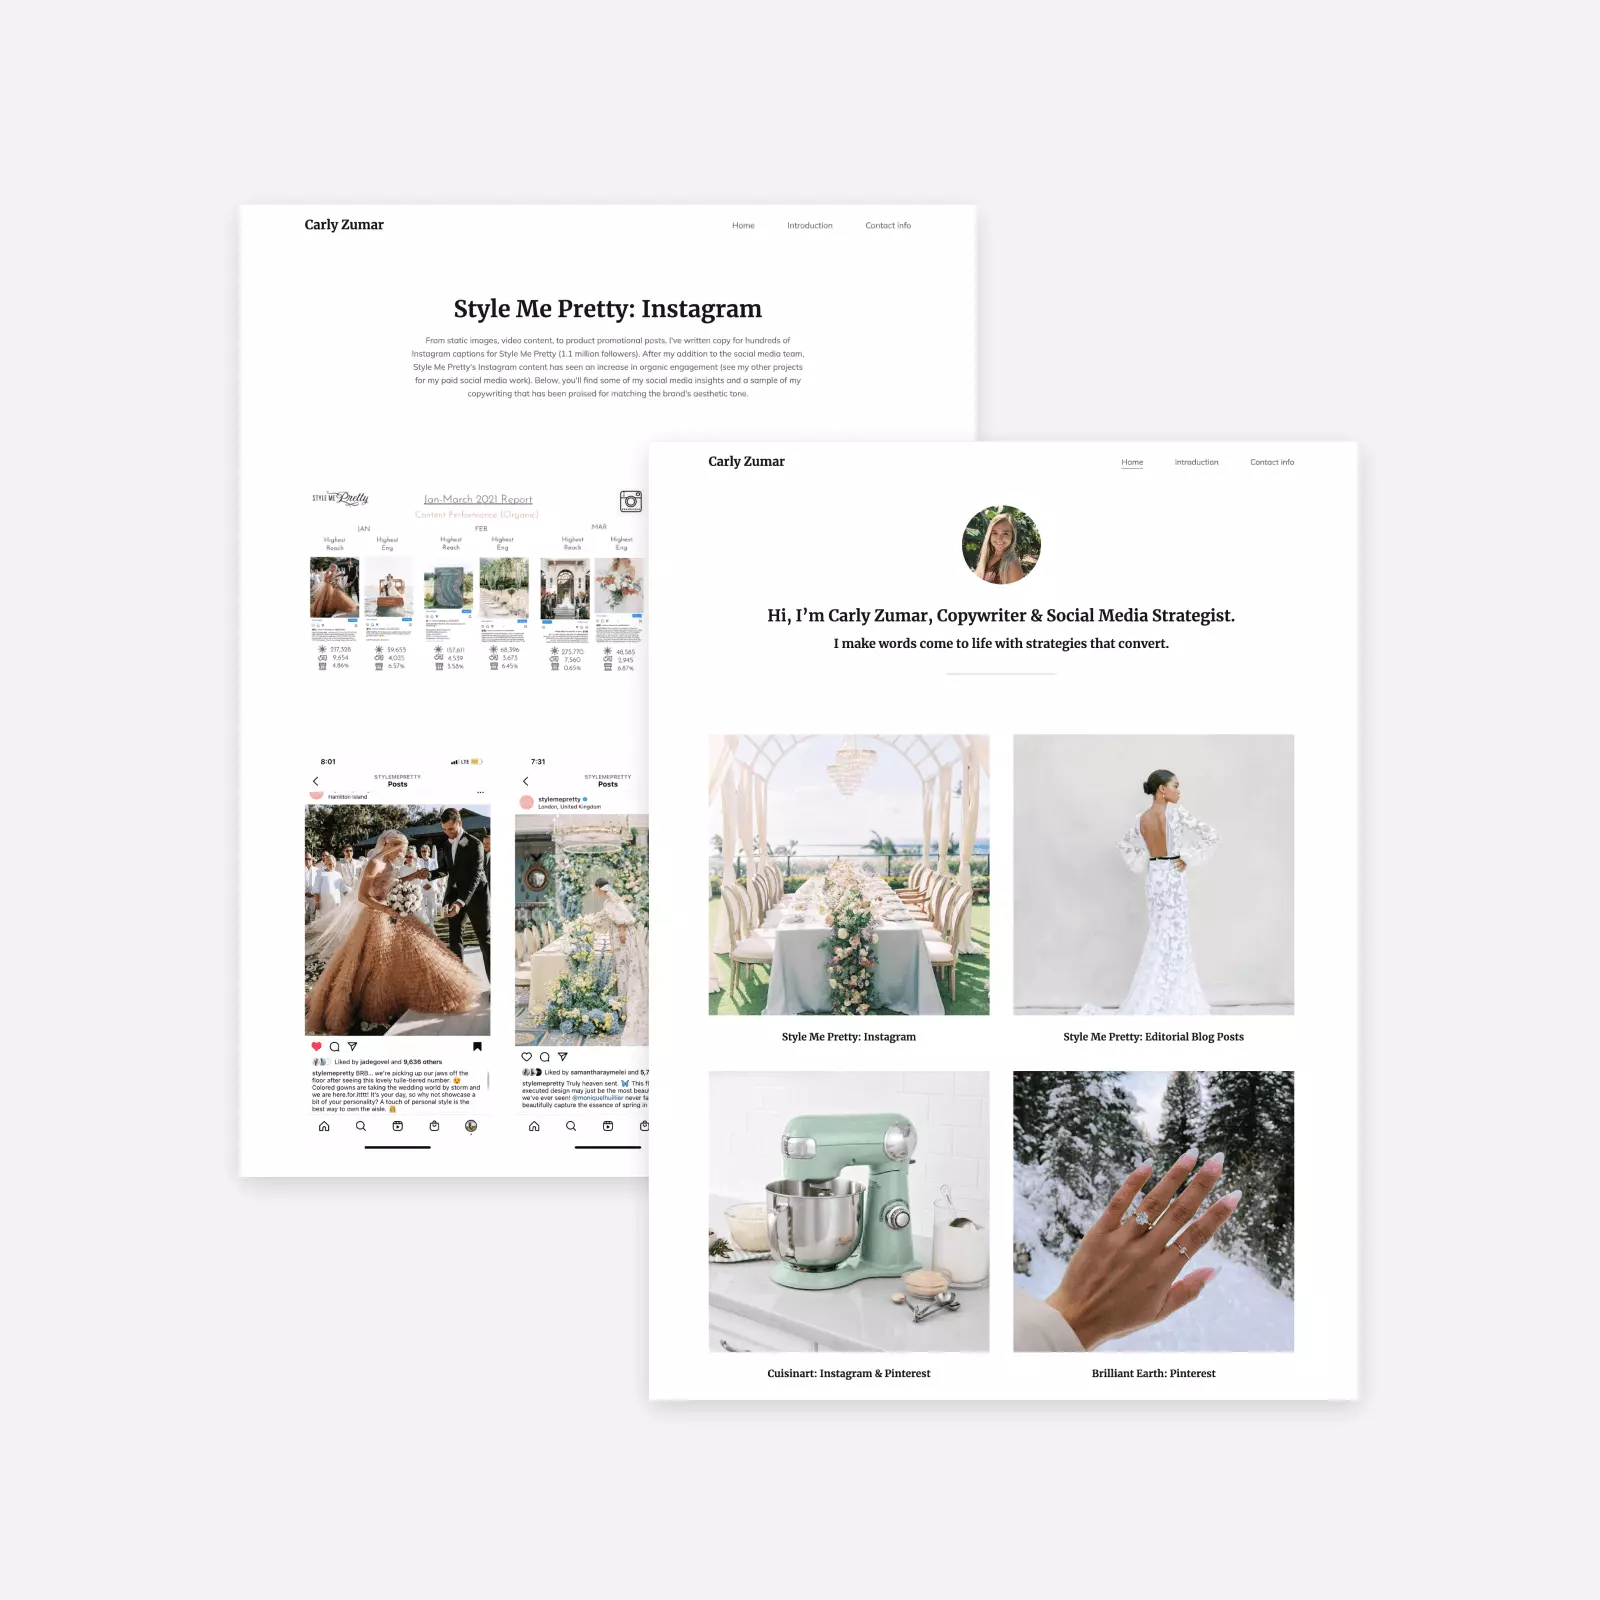 Pages from the copywriting and social media portfolio of Carly Zumar: her homepage featuring projects, an one of her Instagram case study pages.